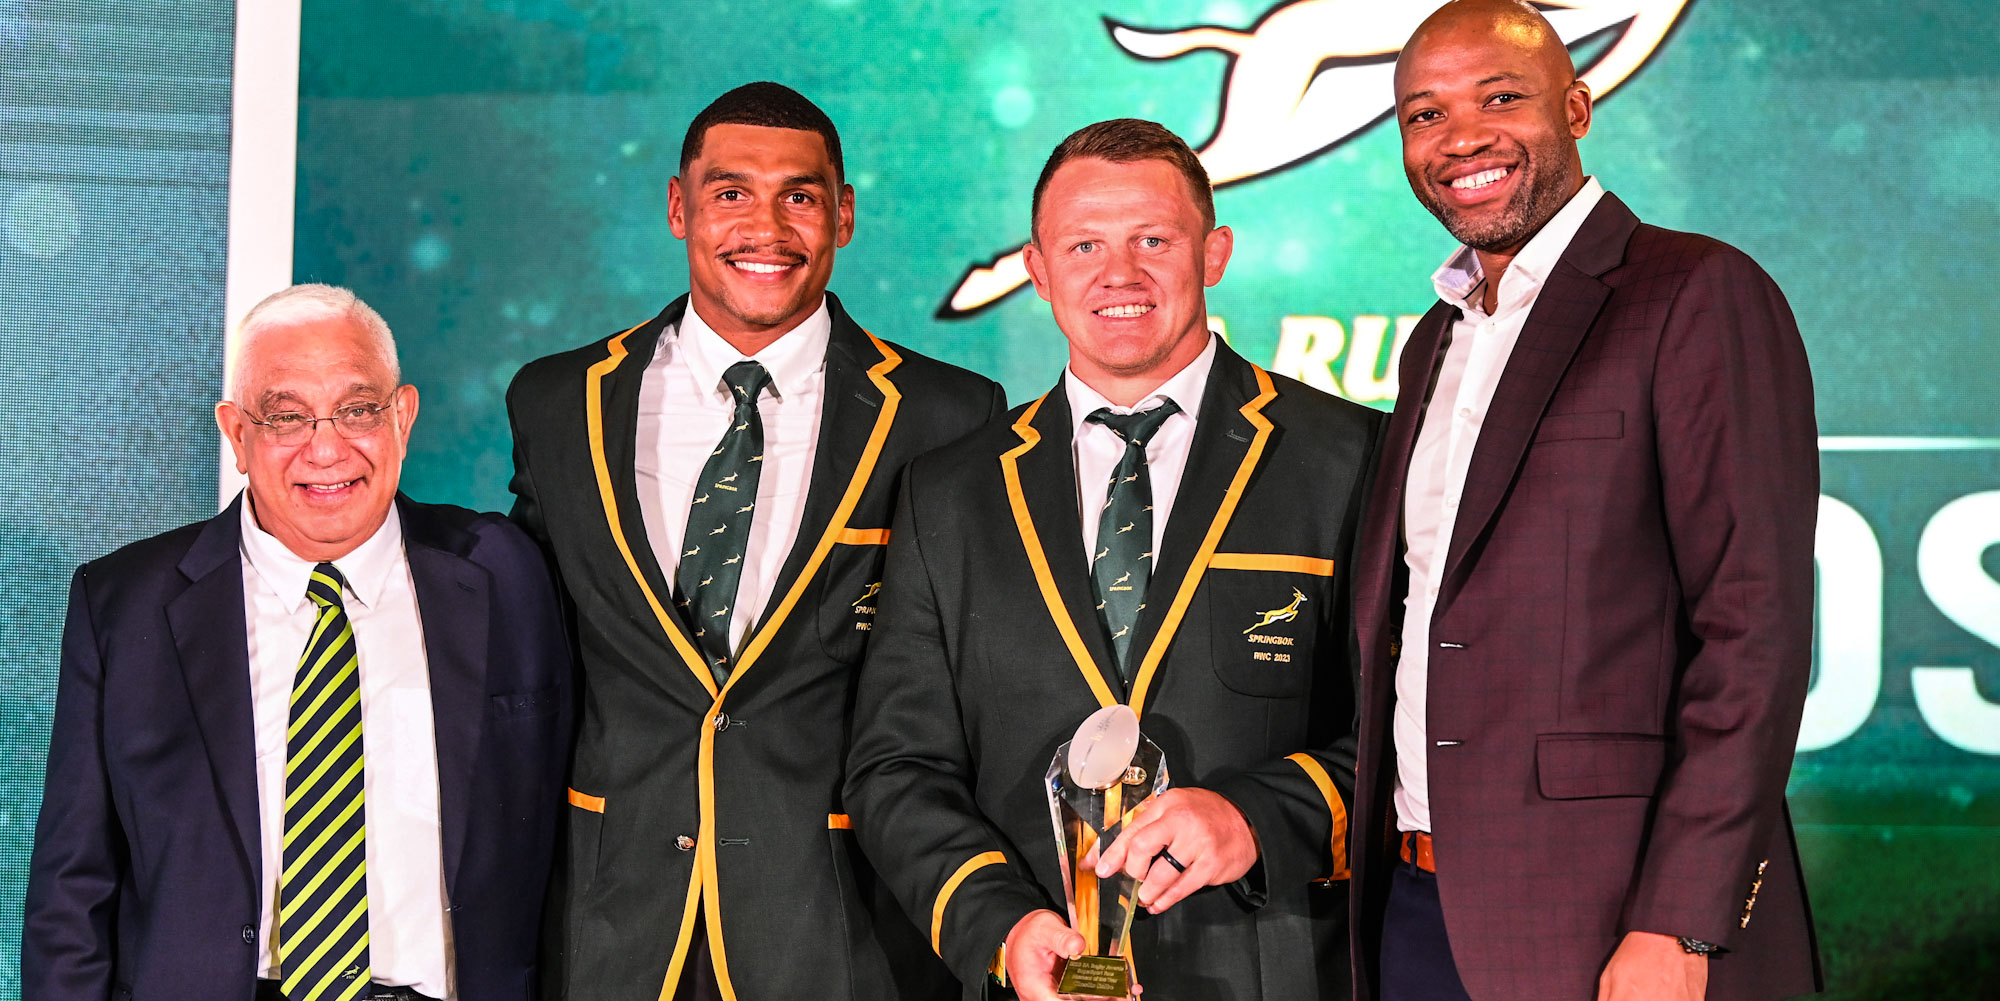 Damian Willemse and Deon Fourie accepted the Team of the Year award on behalf of the Springboks.